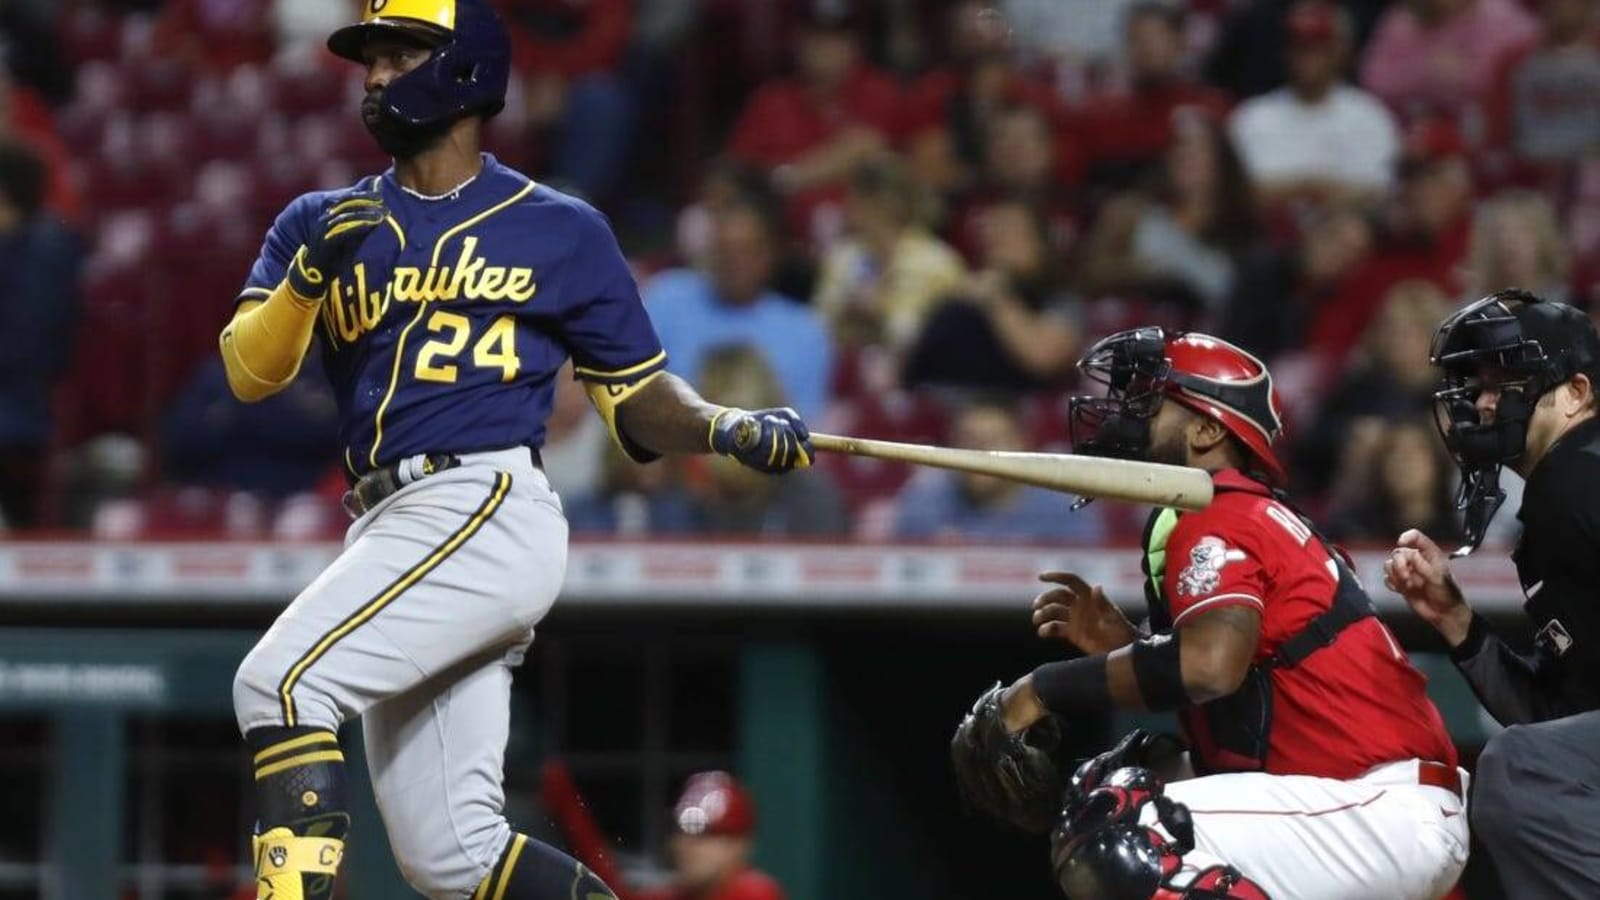 Brewers under pressure to keep beating Reds